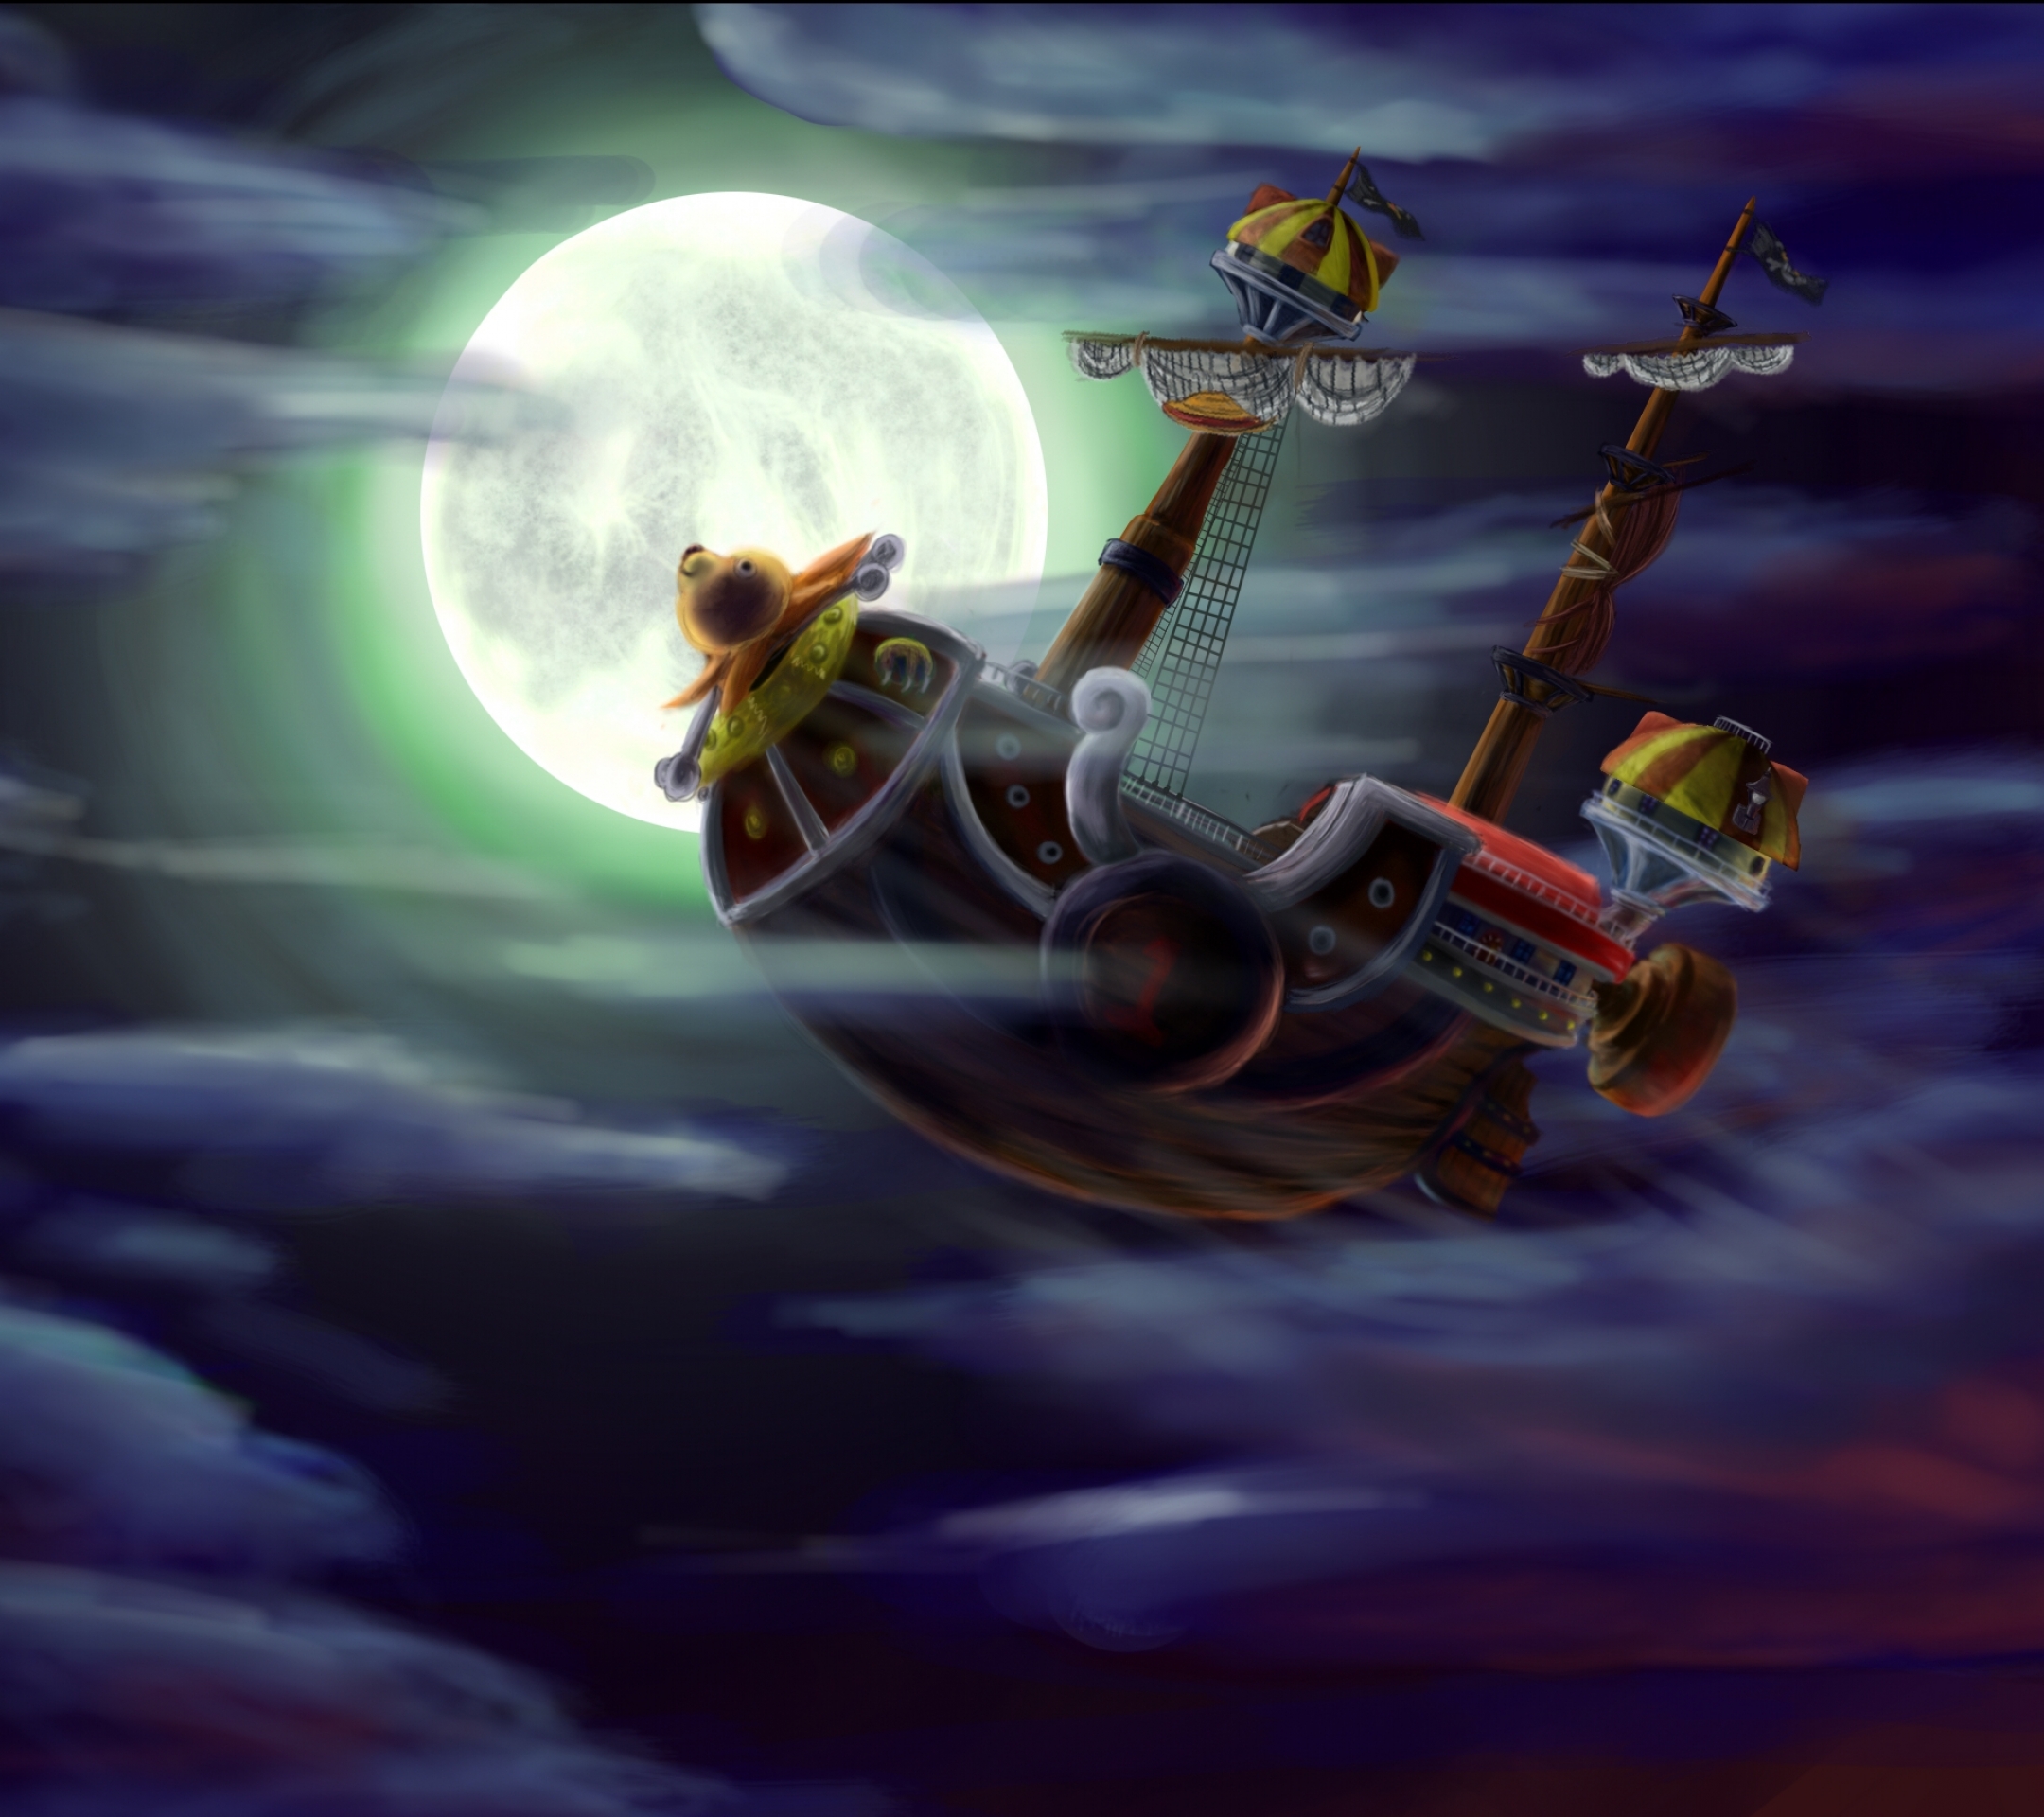 One Piece Thousand Sunny Flying - HD Wallpaper 